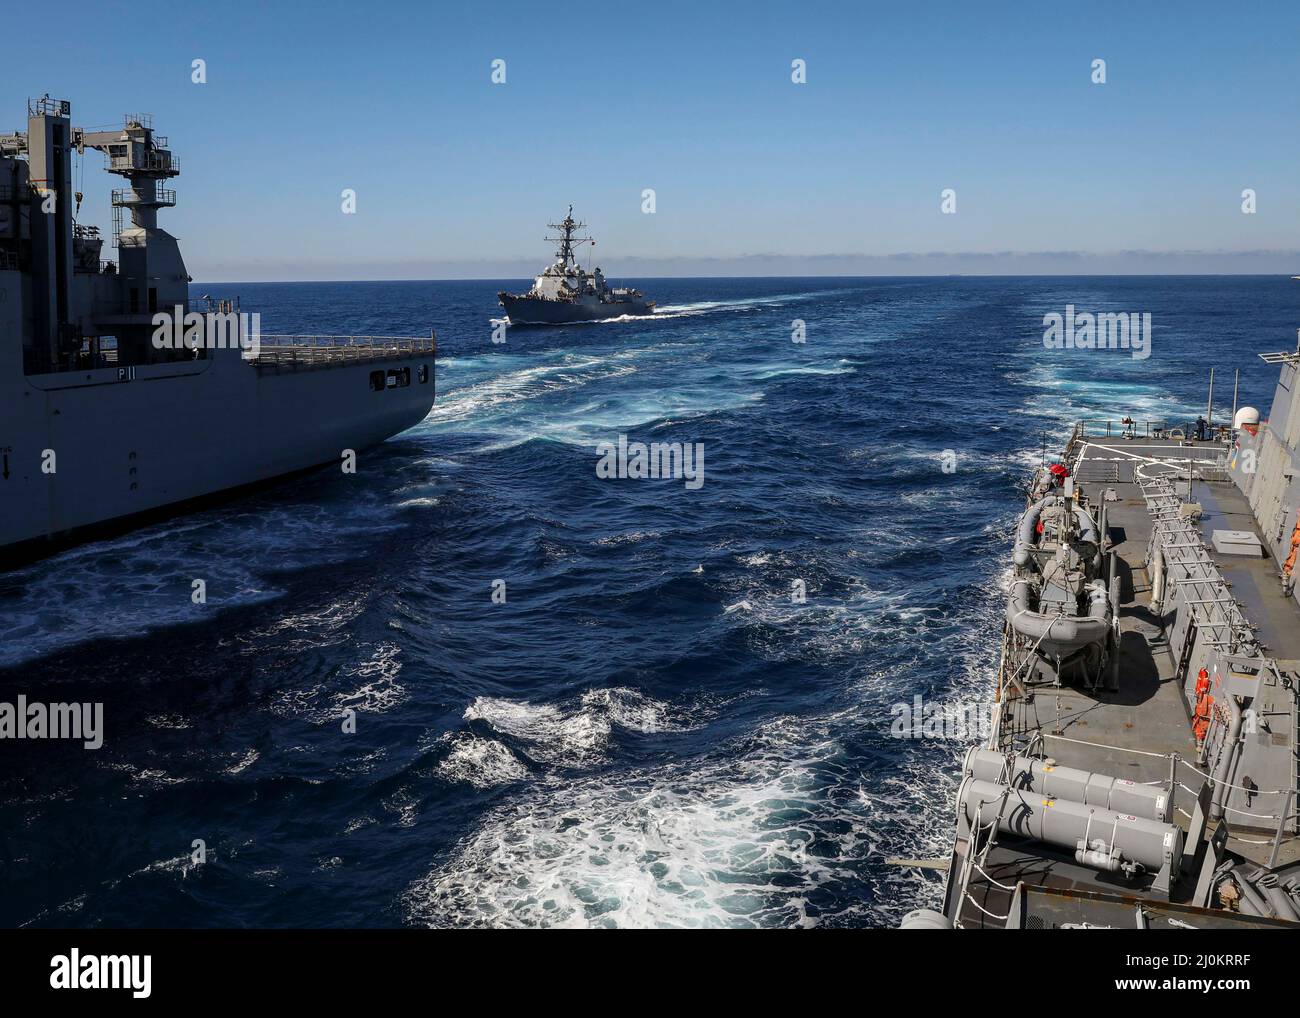 ATLANTIC OCEAN (March 17, 2022) – The Arleigh Burke-class guided-missile destroyer USS Truxtun (DDG 103), center, and the Arleigh Burke-class guided-missile destroyer USS Porter (DDG 78), right, move into position alongside the Lewis and Clark-class dry cargo ship USNS William McLean (T AKE-12), March 17. USS Porter, forward-deployed to Rota, Spain, is currently participating in Task Force Exercise in the U.S. 2nd Fleet area of operations. TFEX serves as the certification exercise for independent deploying ships and is designed to test mission readiness and performance in integrated operations Stock Photo